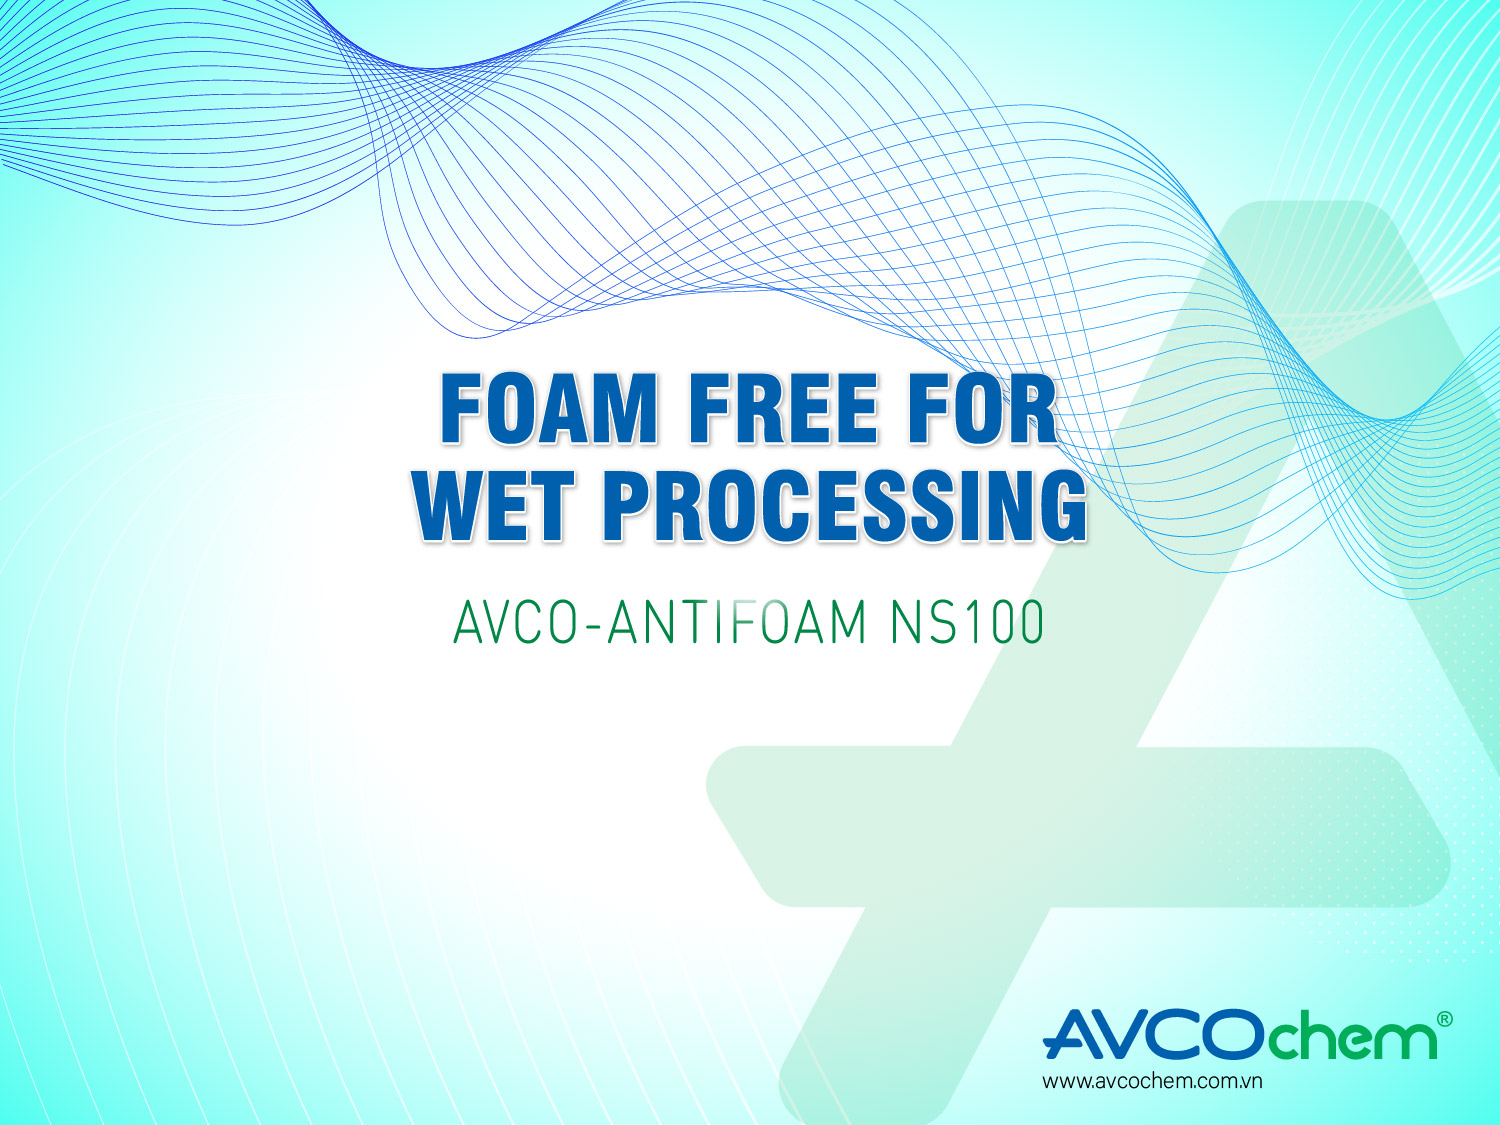 FOAM FREE FOR WET PROCESSING